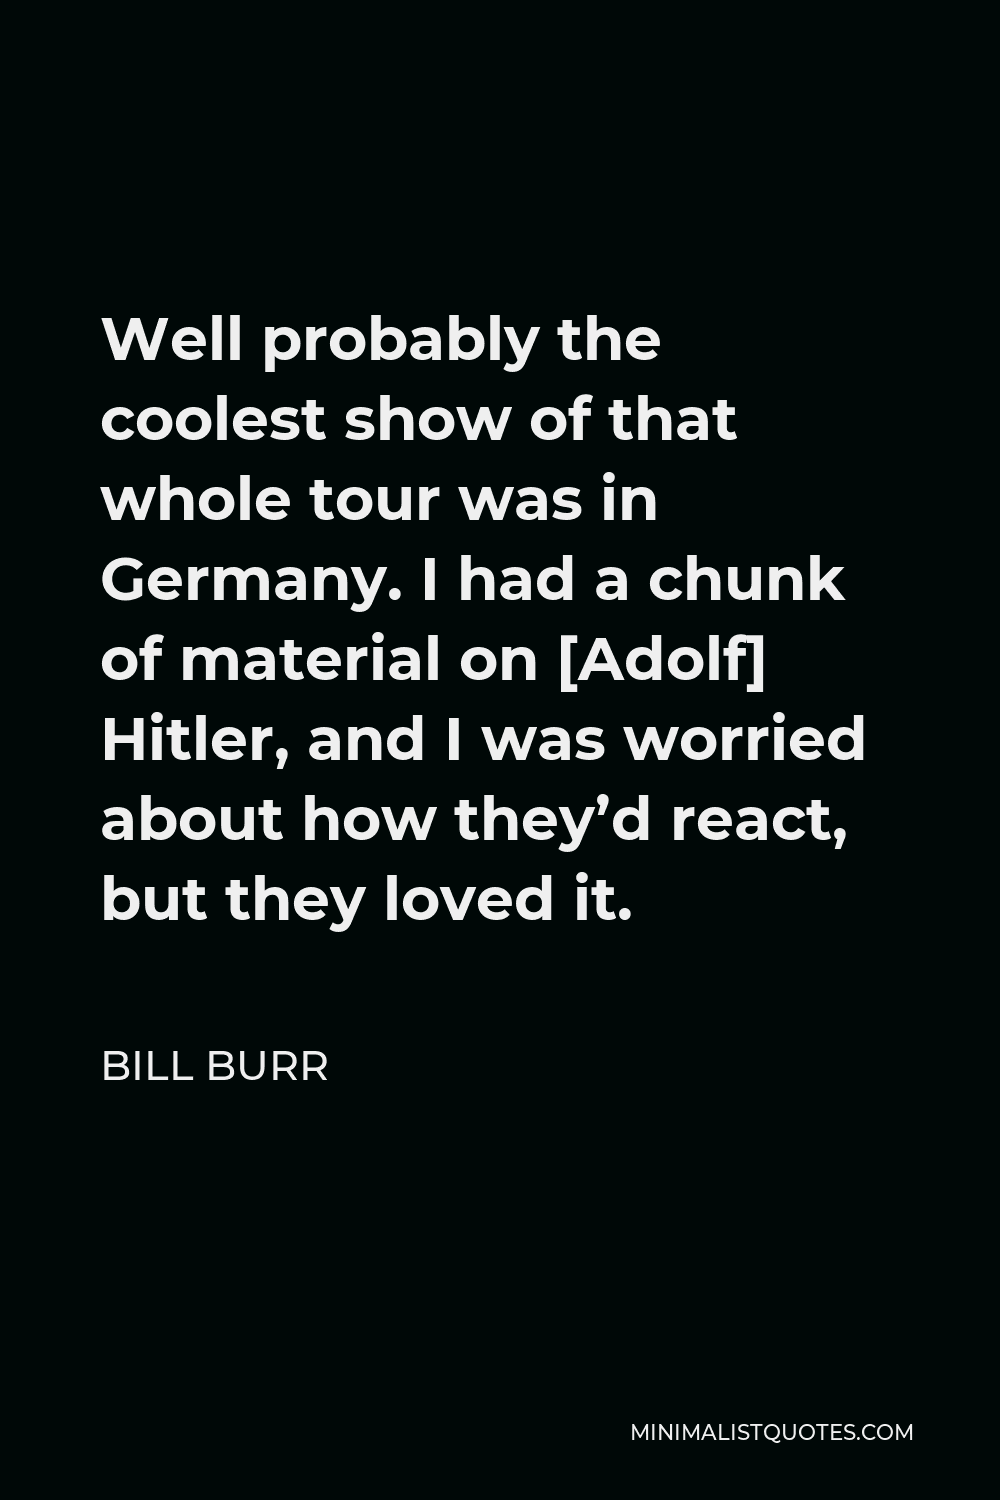 Bill Burr Quote - Well probably the coolest show of that whole tour was in Germany. I had a chunk of material on [Adolf] Hitler, and I was worried about how they’d react, but they loved it.